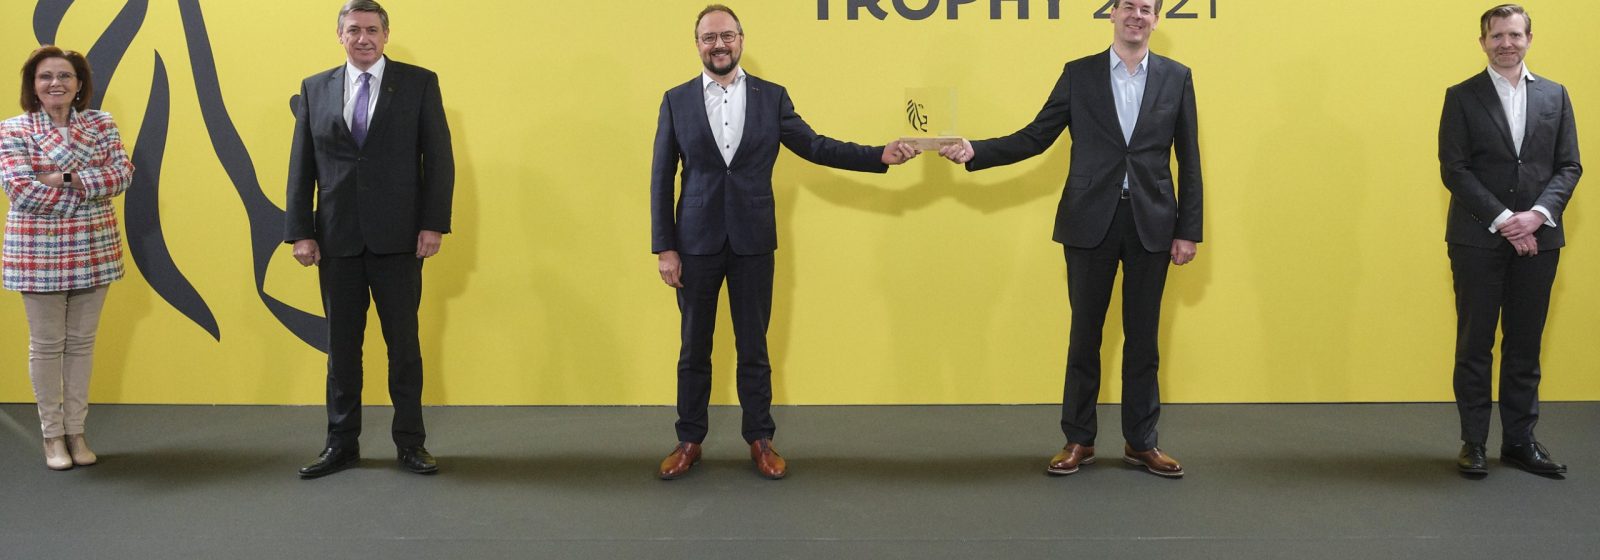 K+N wint Foreign Investment Trophy